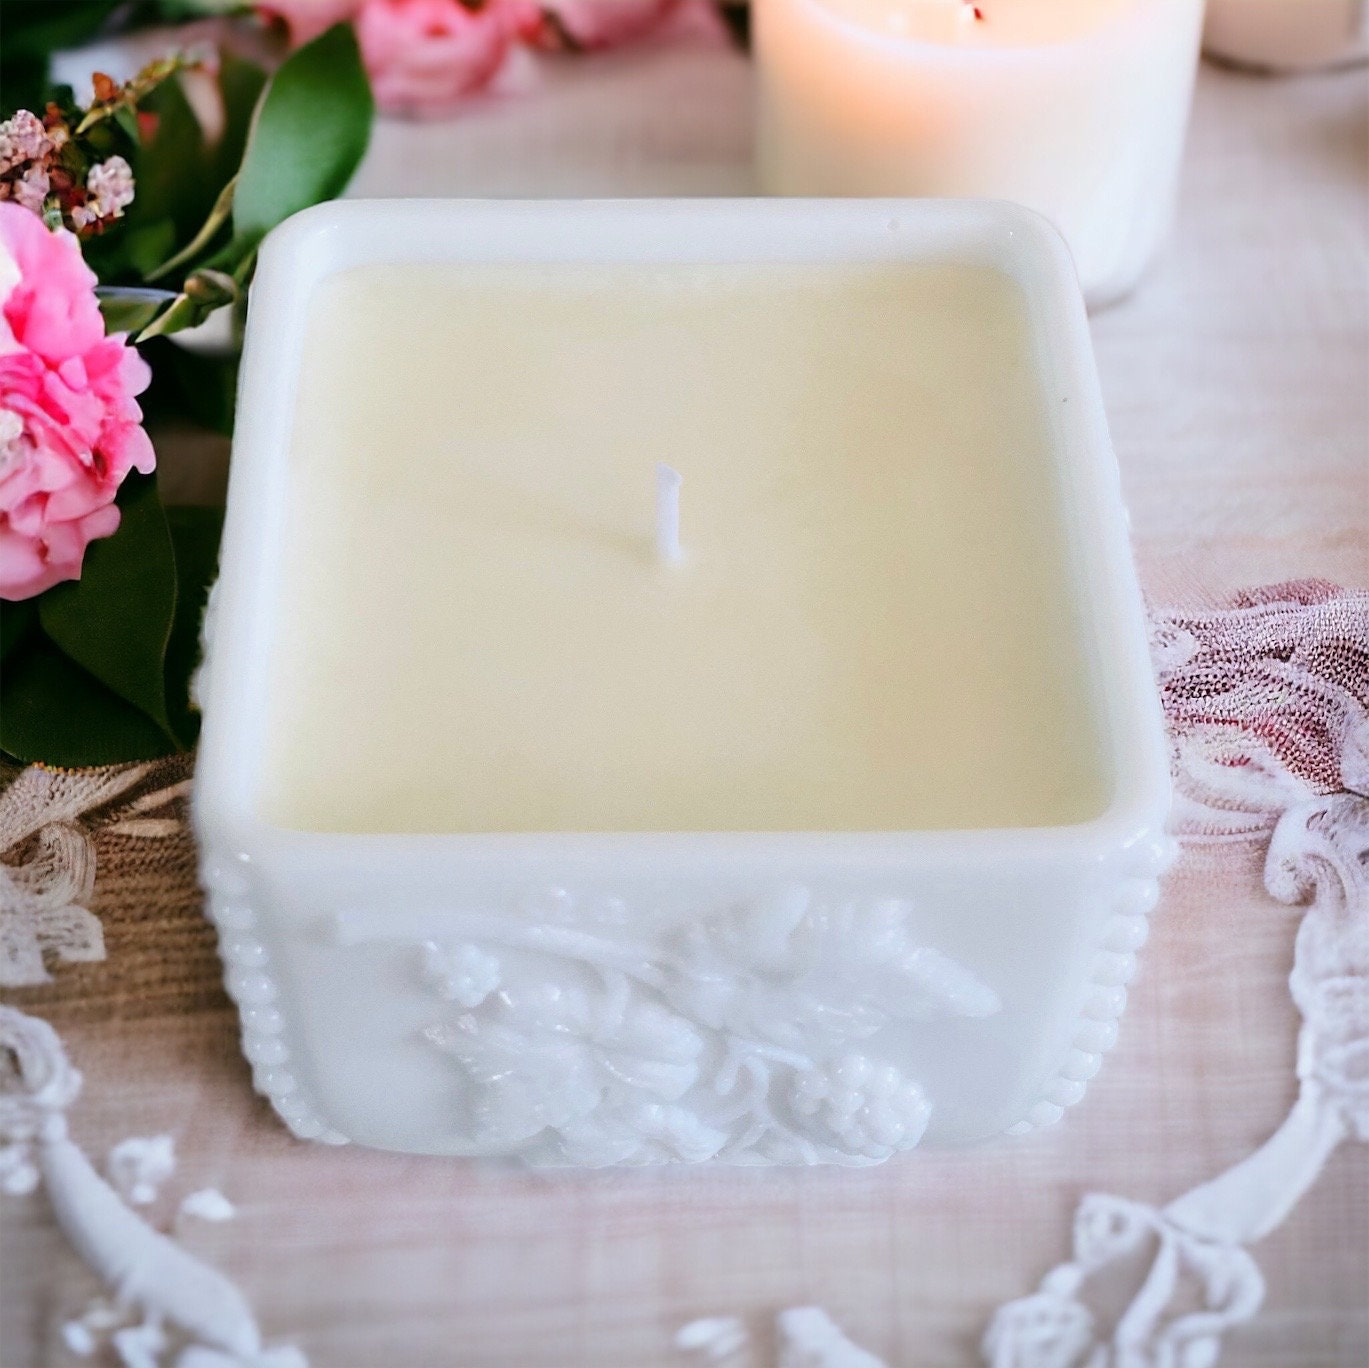 Scented Candles, Milk Glass, Best Friend Gifts, Bridal Shower Gift